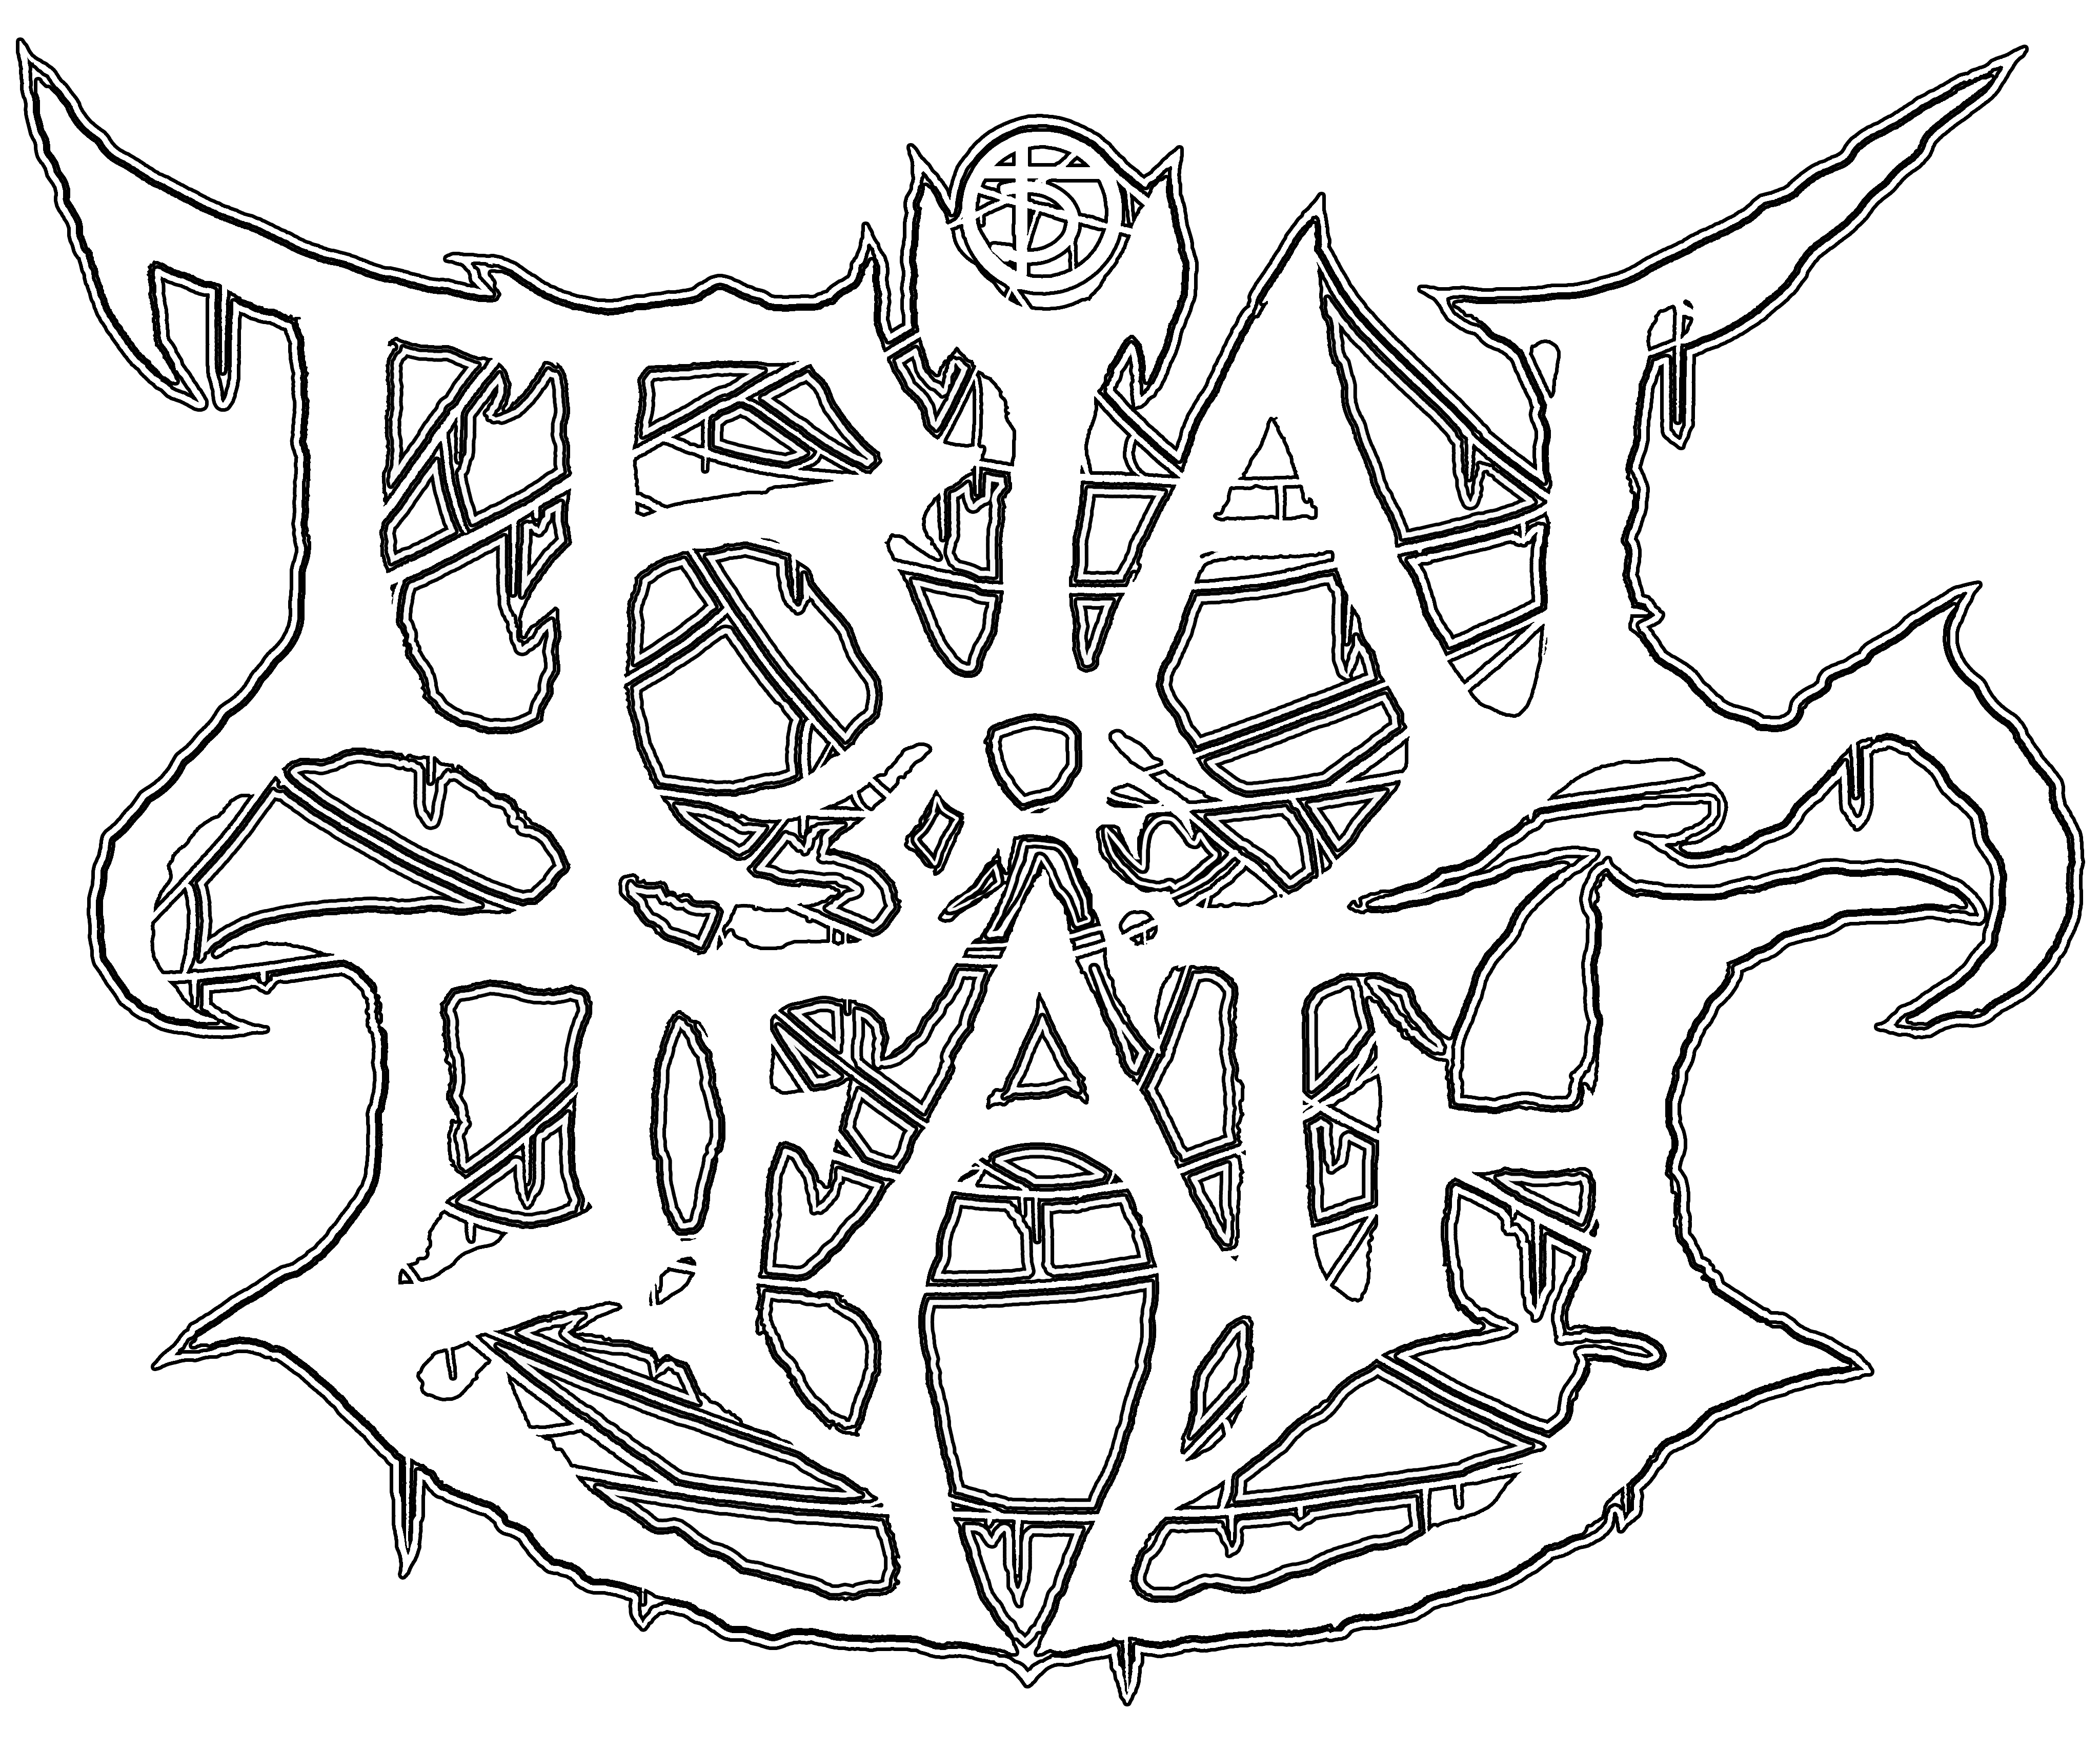 TRIAL of DEATH Website Home